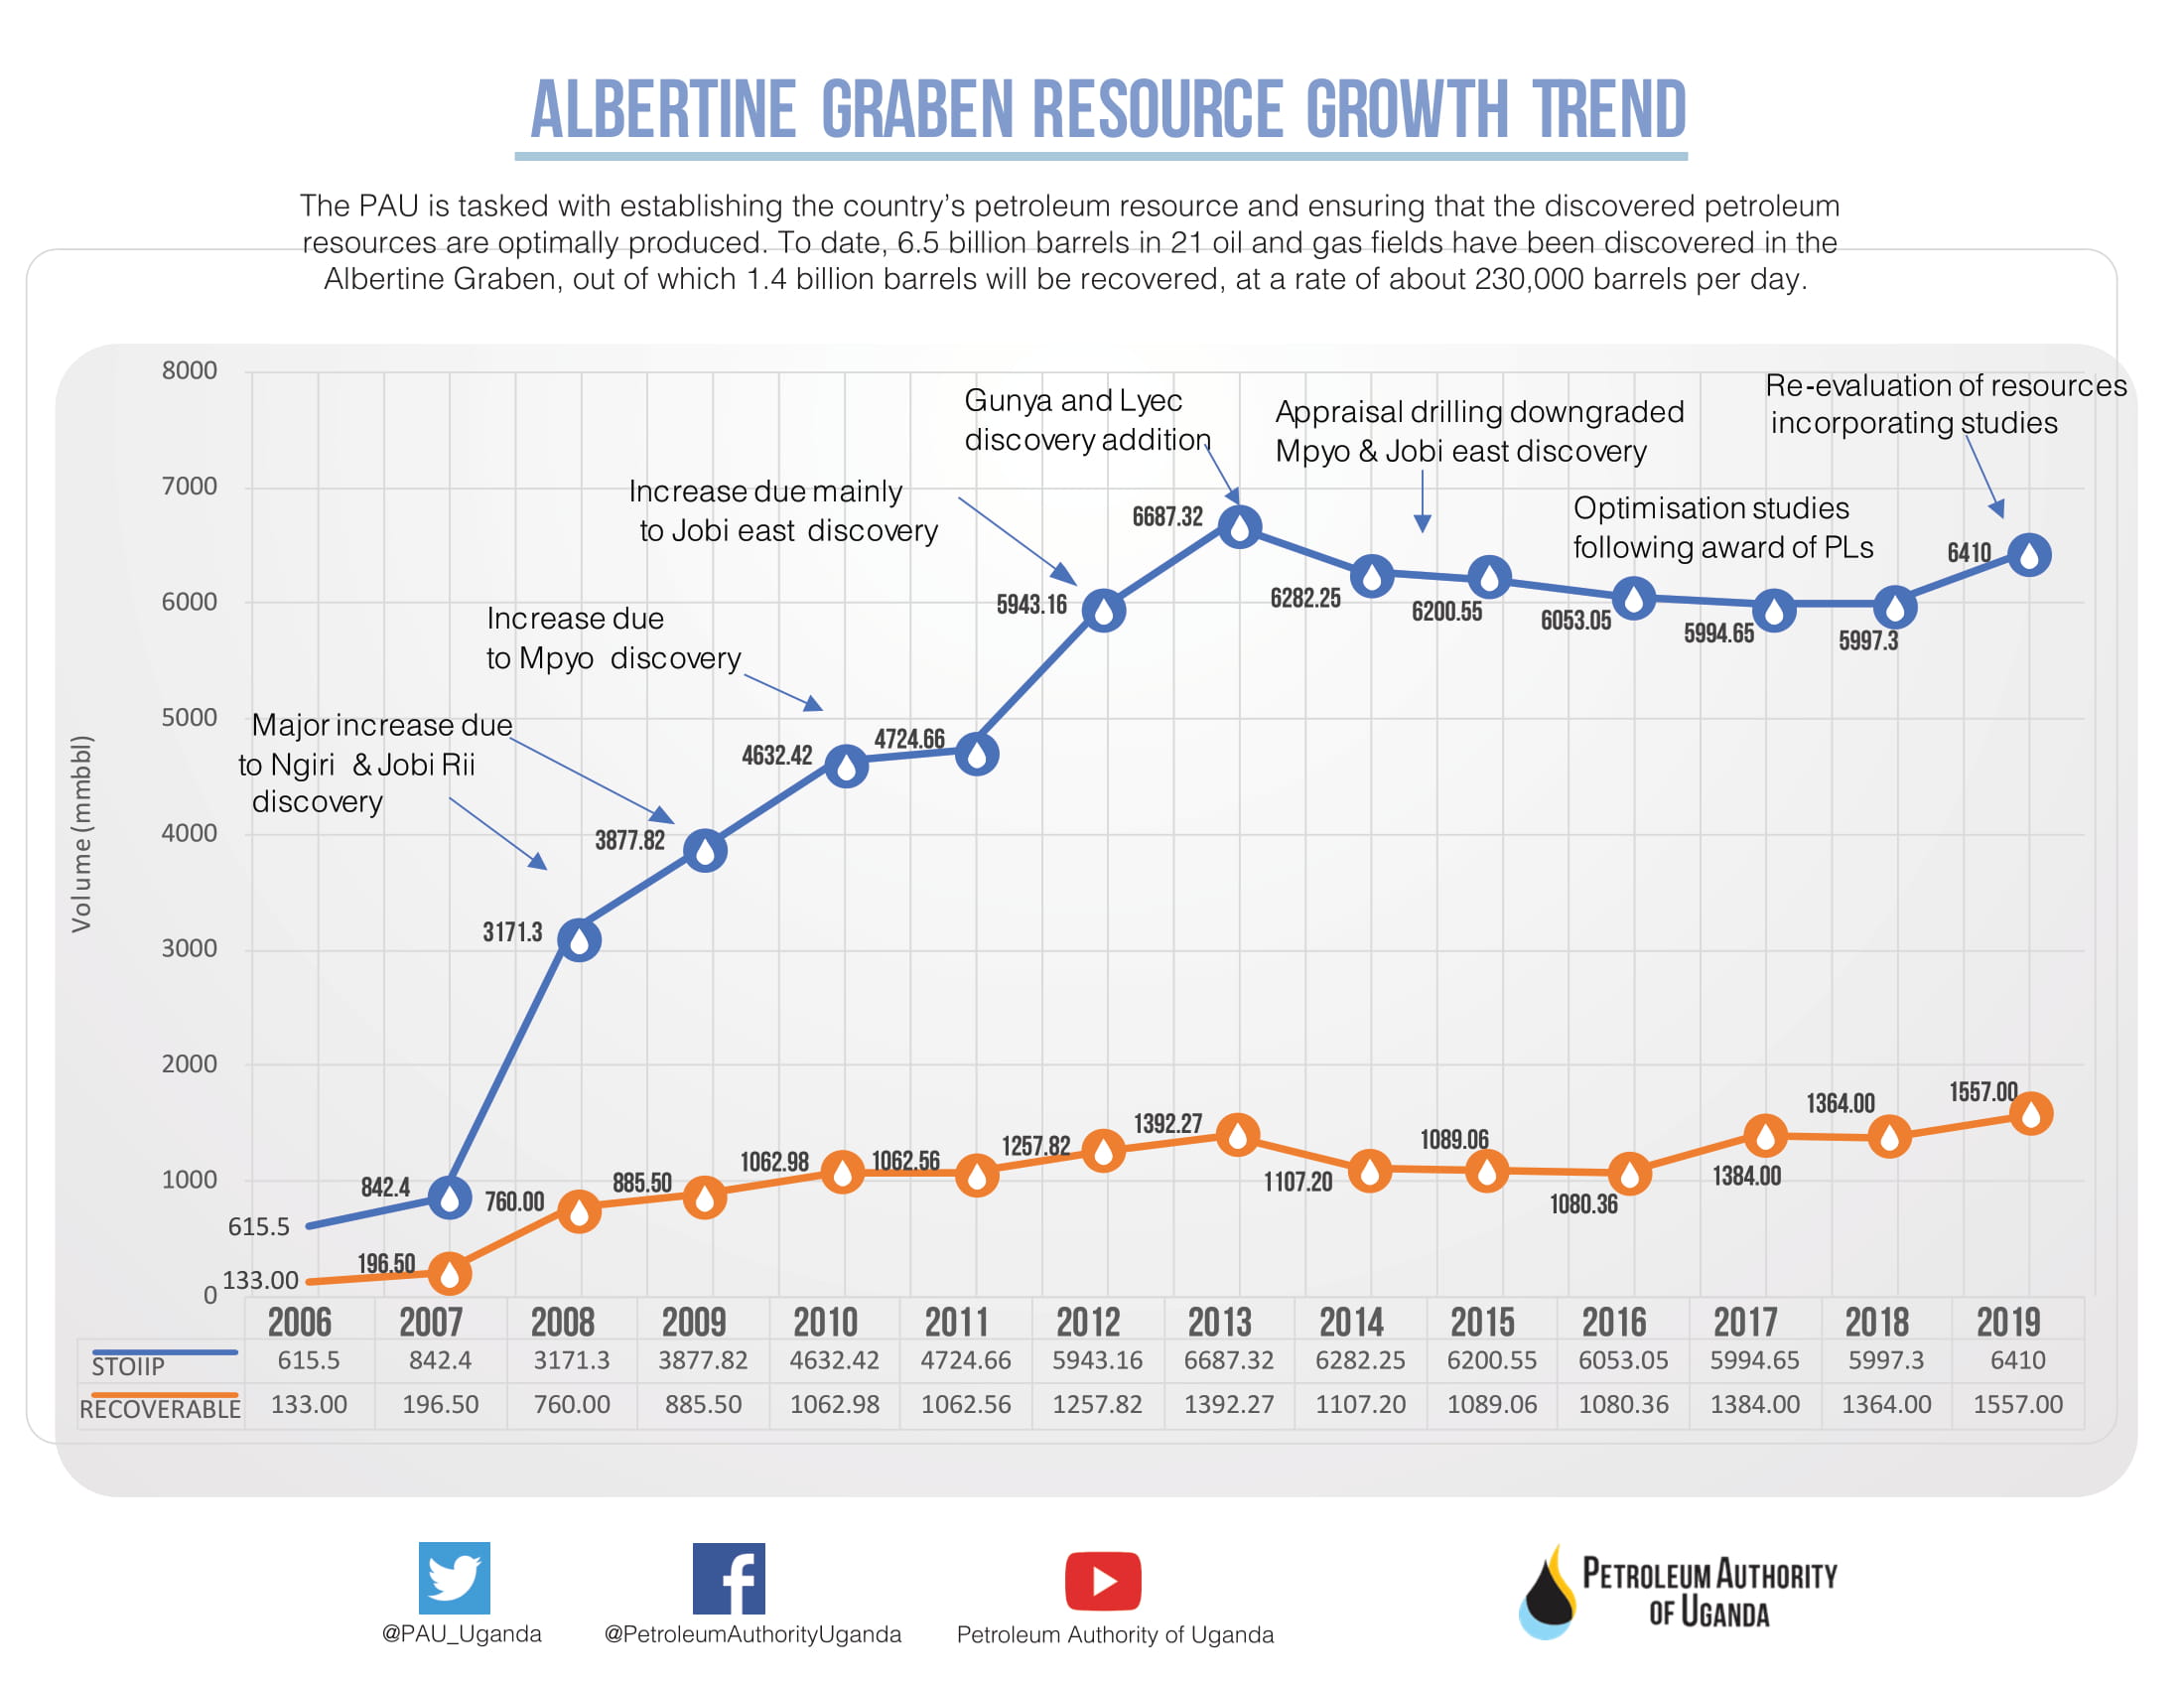 Resource growth trend